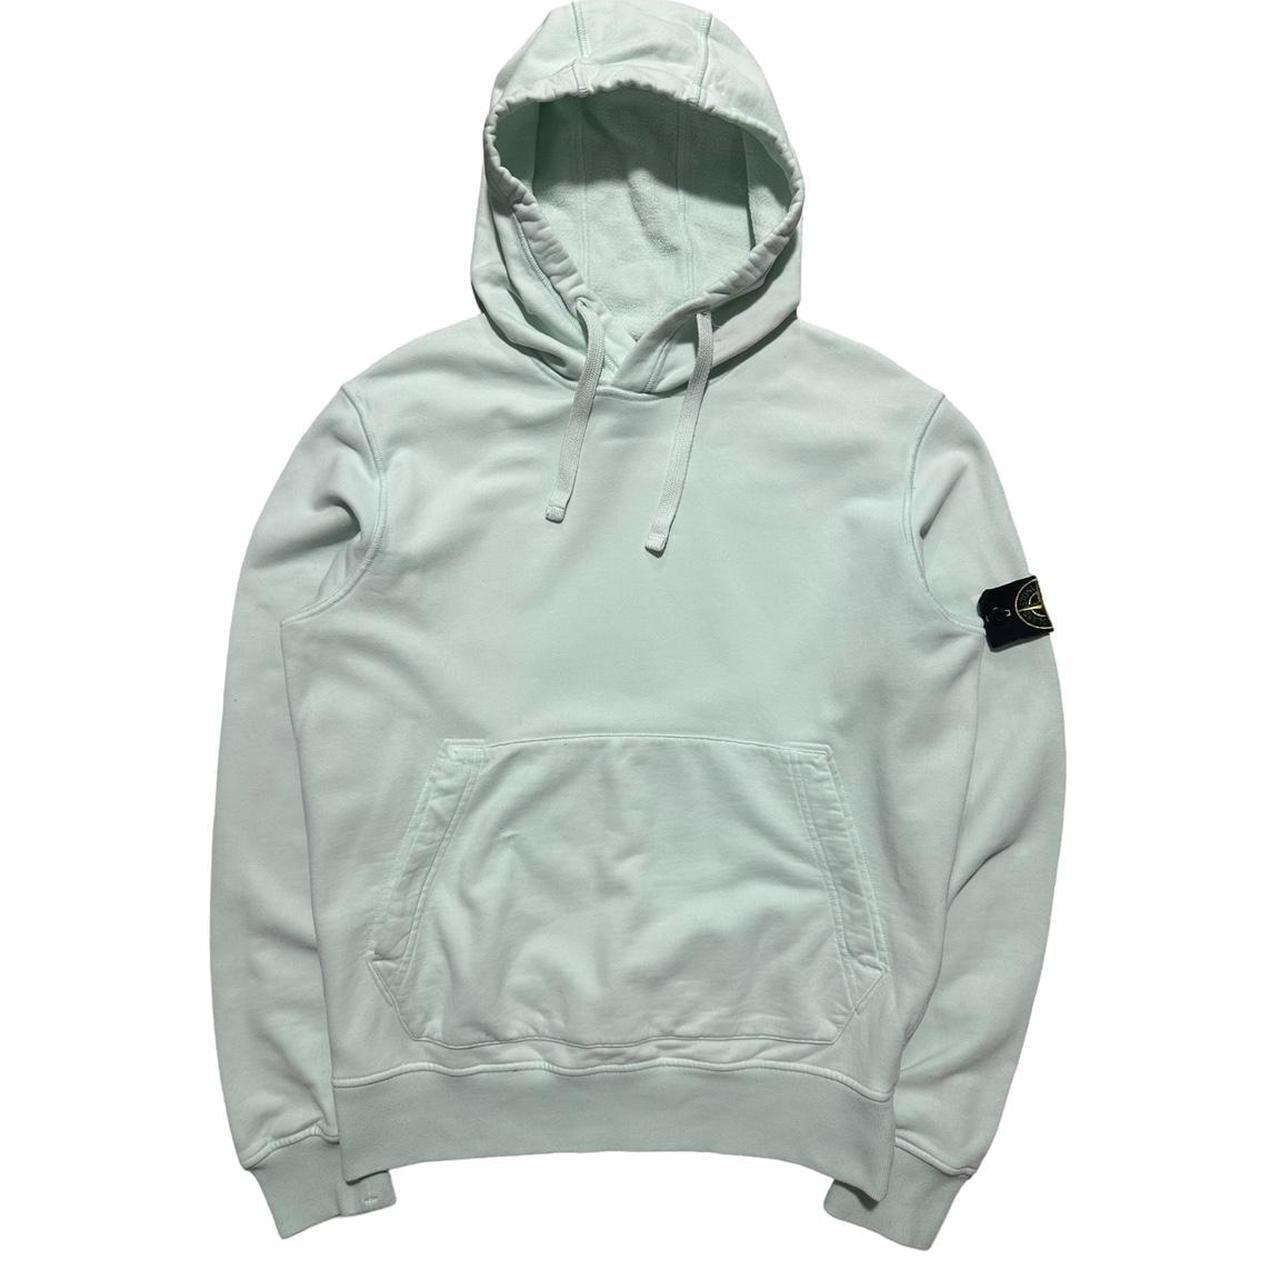 Stone Island Light Blue Pullover Hoodie - Known Source